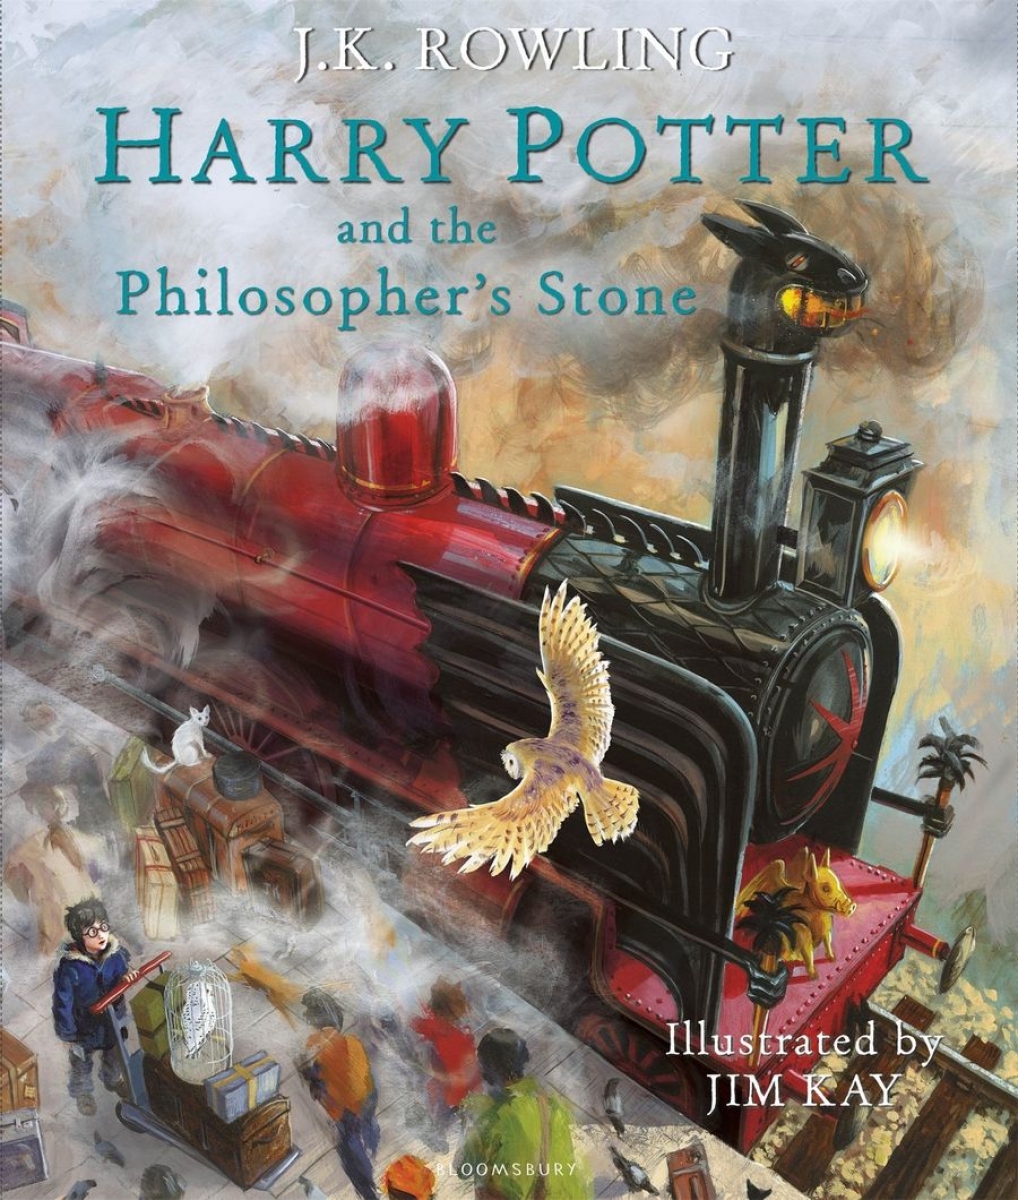 Rowling J.K. Harry Potter and the Philosopher's Stone HB Illustr. 